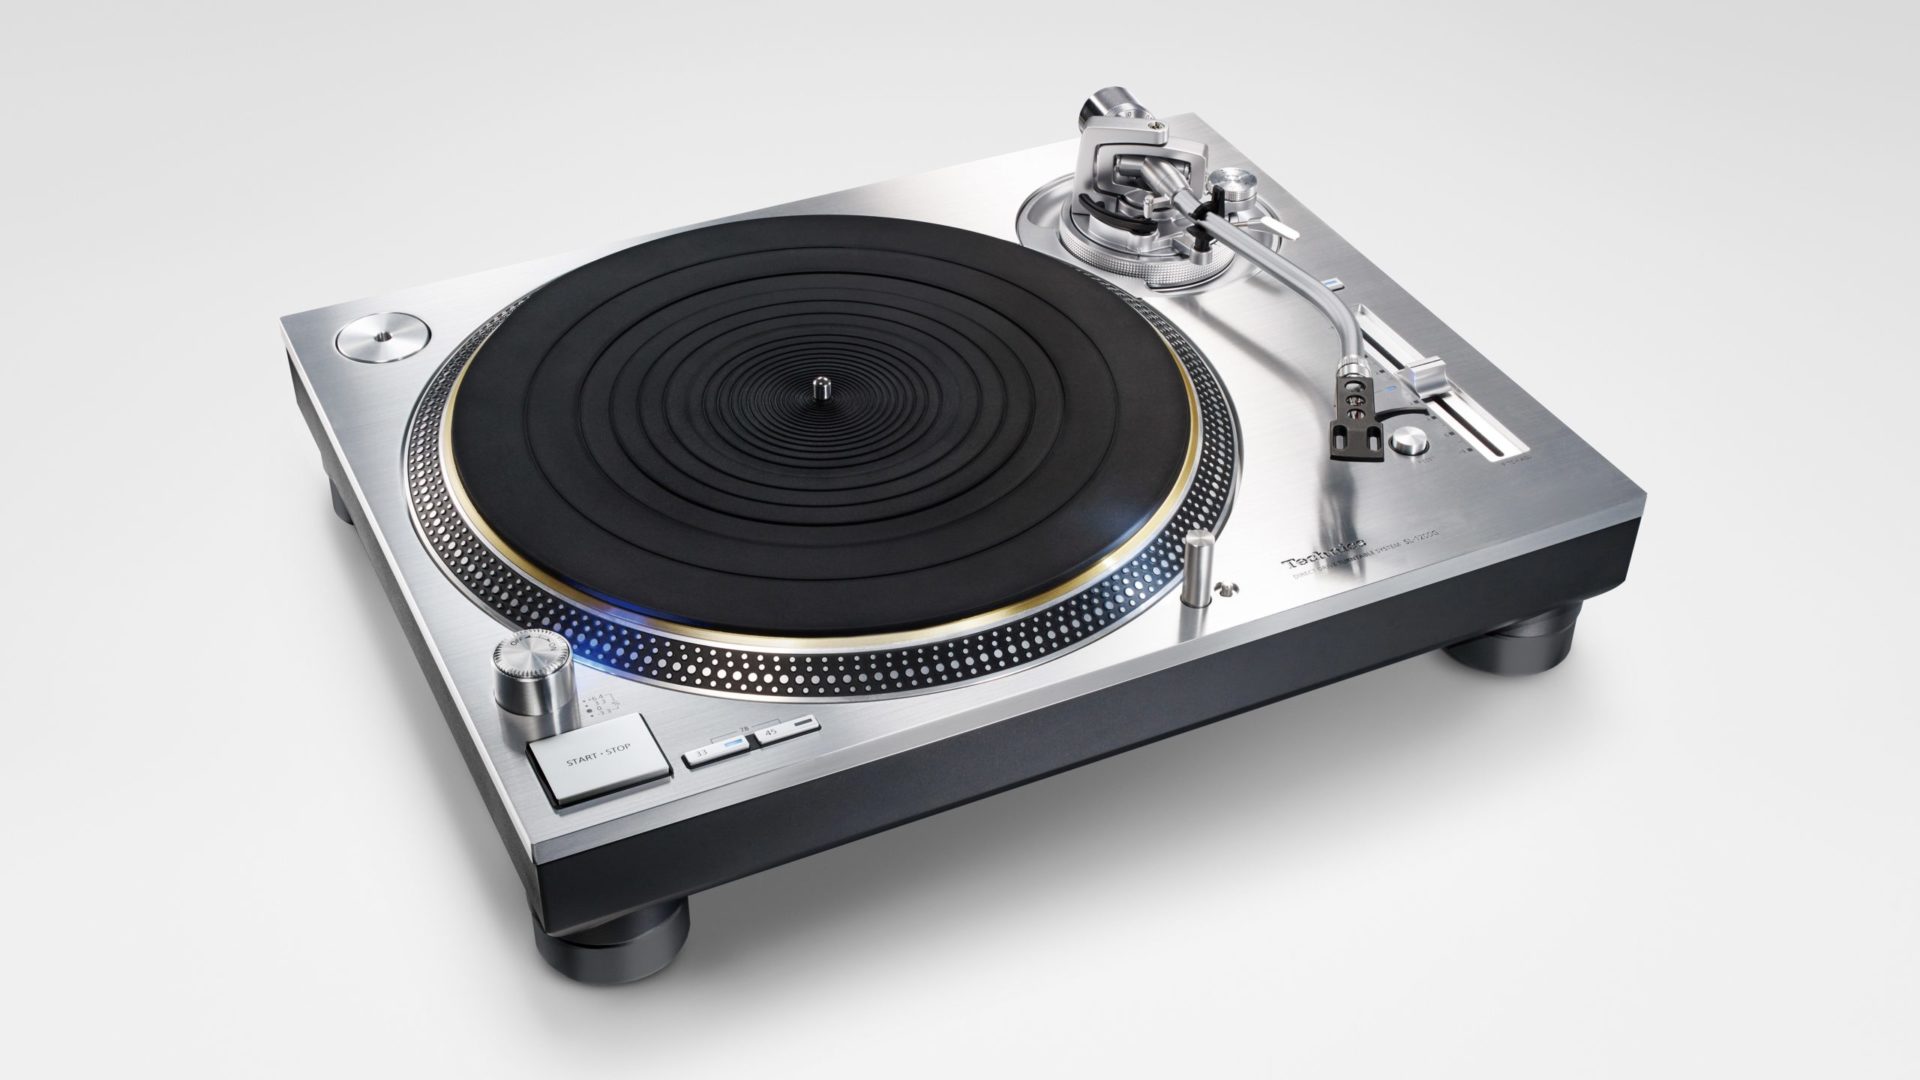 a silver technics turntable with black rubber mat on the platter